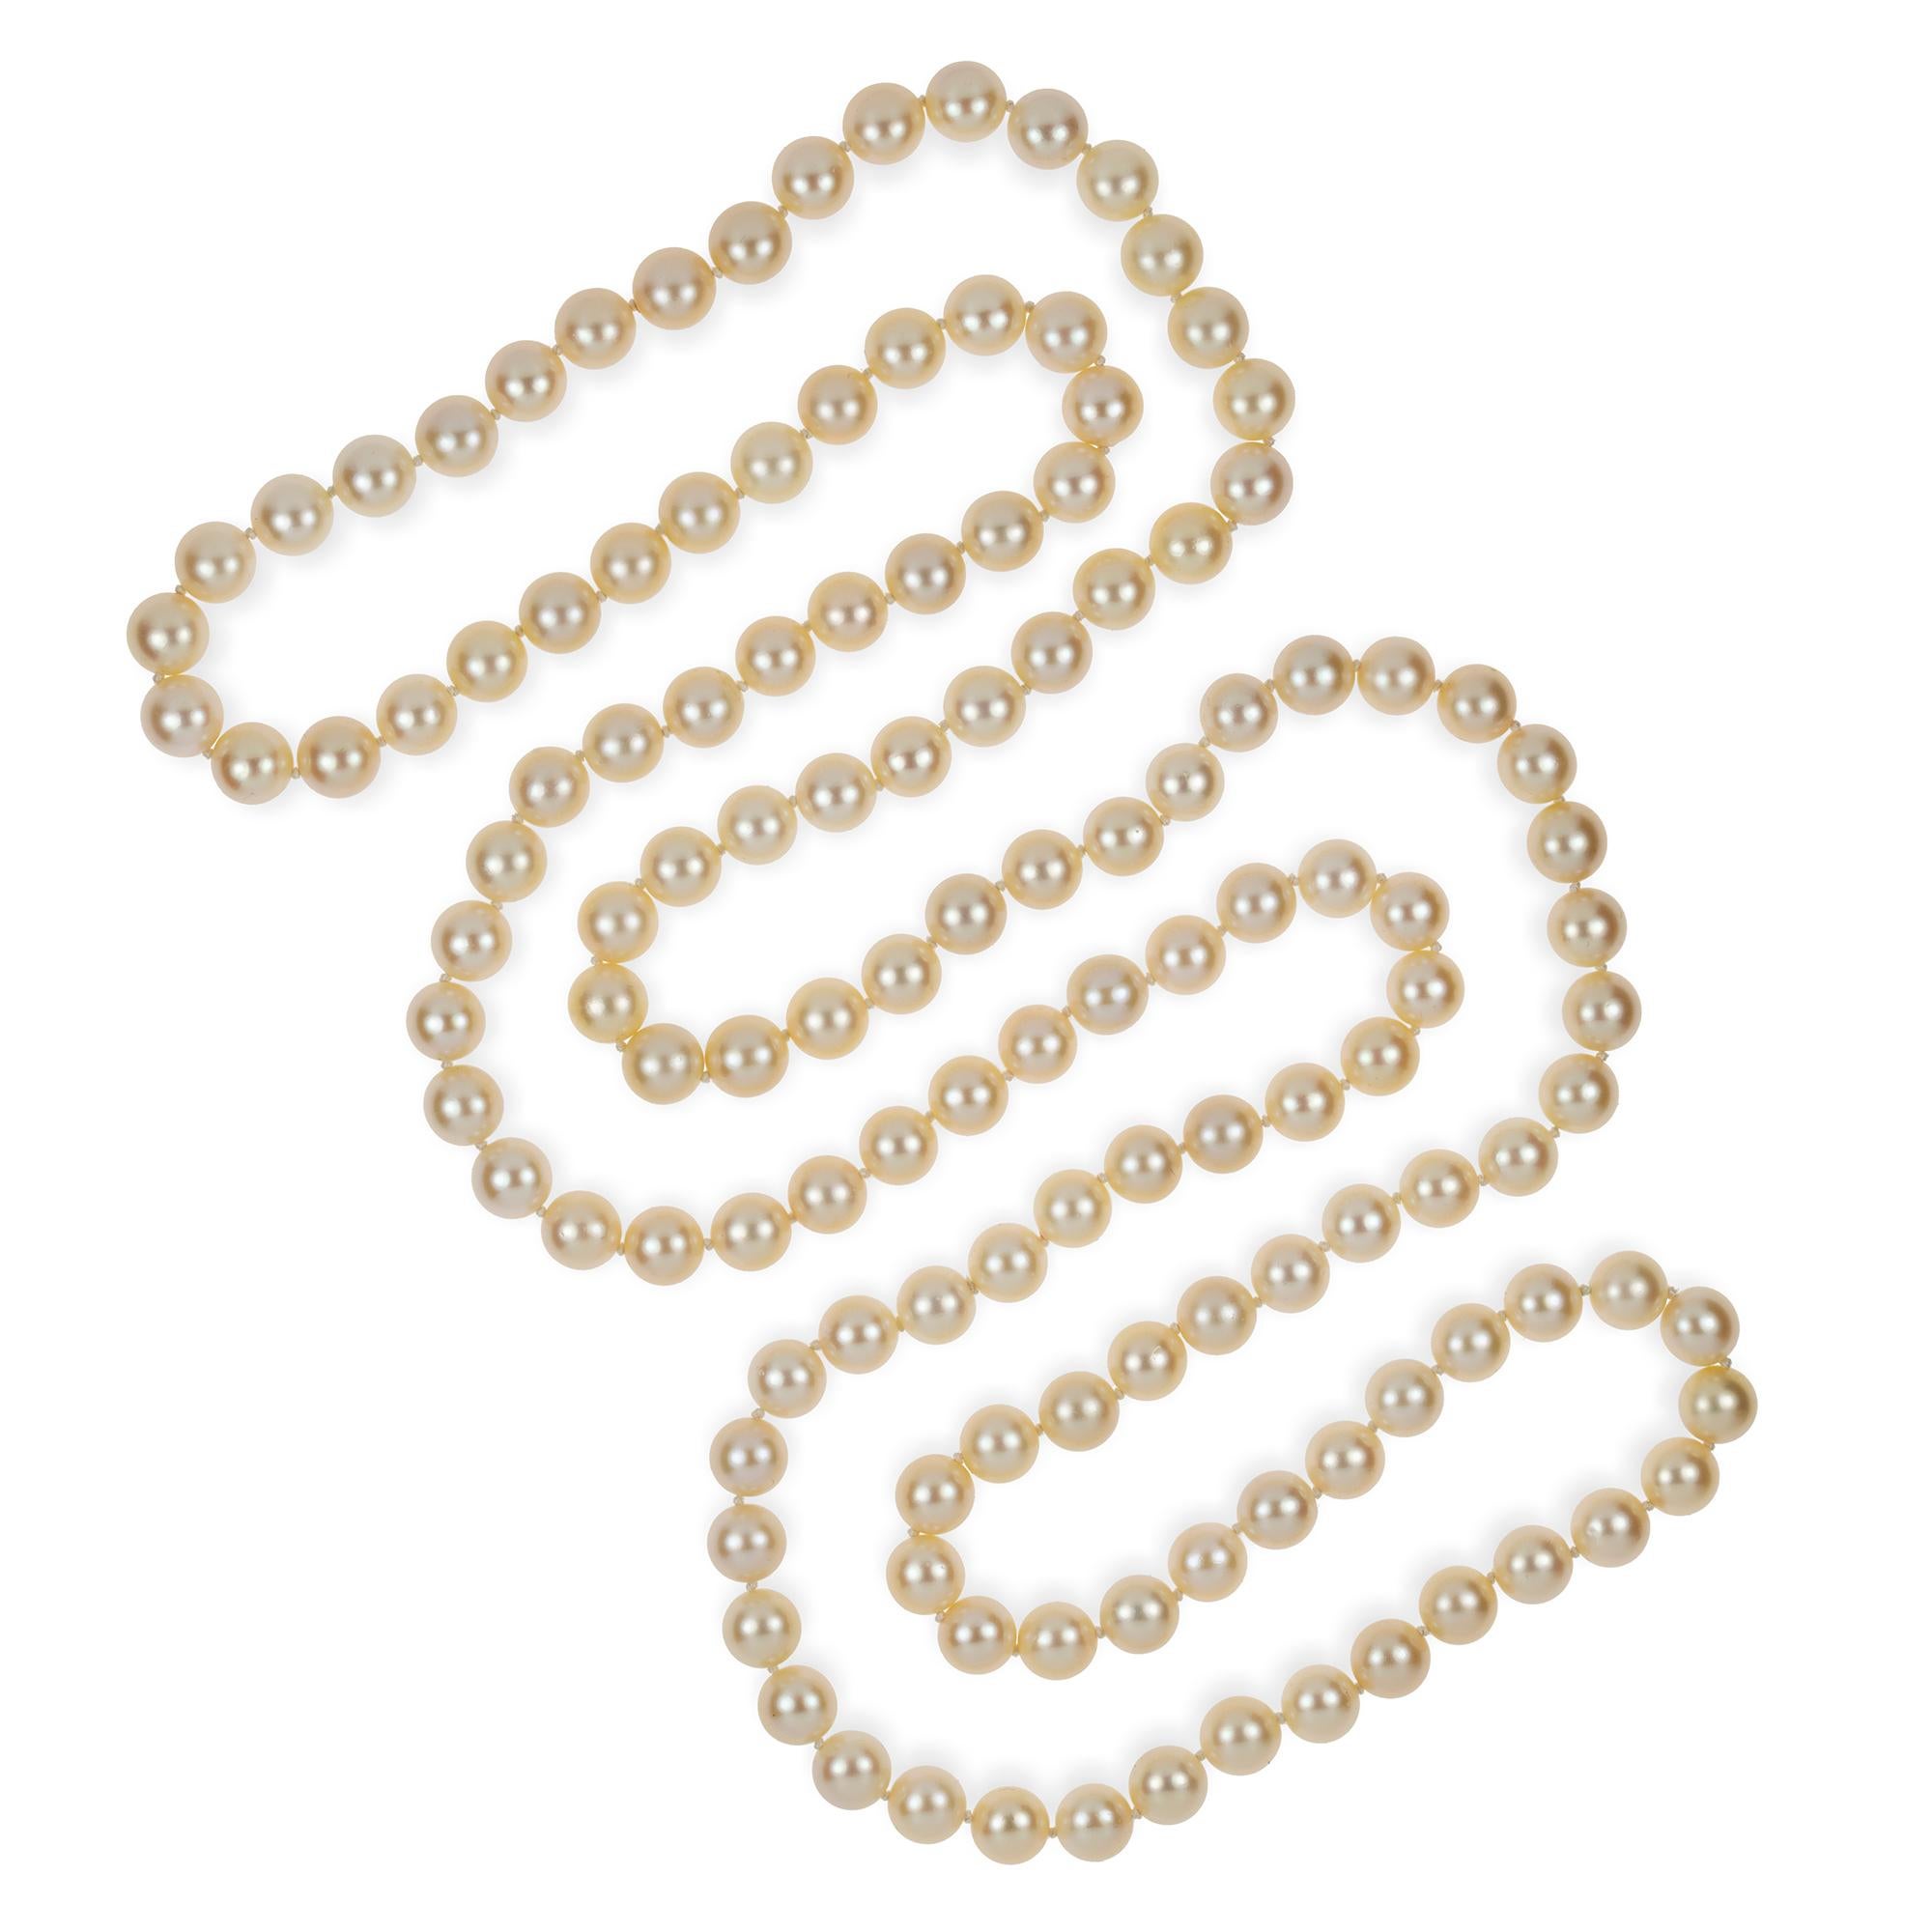 A long cultured pearl rope necklace, the one hundred and thirty-two cultured pearls of cream colour, with diameter 9-9.5mm, strung and knotted, measuring approximately 132cm long, gross weight 14.7 grams.

This necklace is in very good